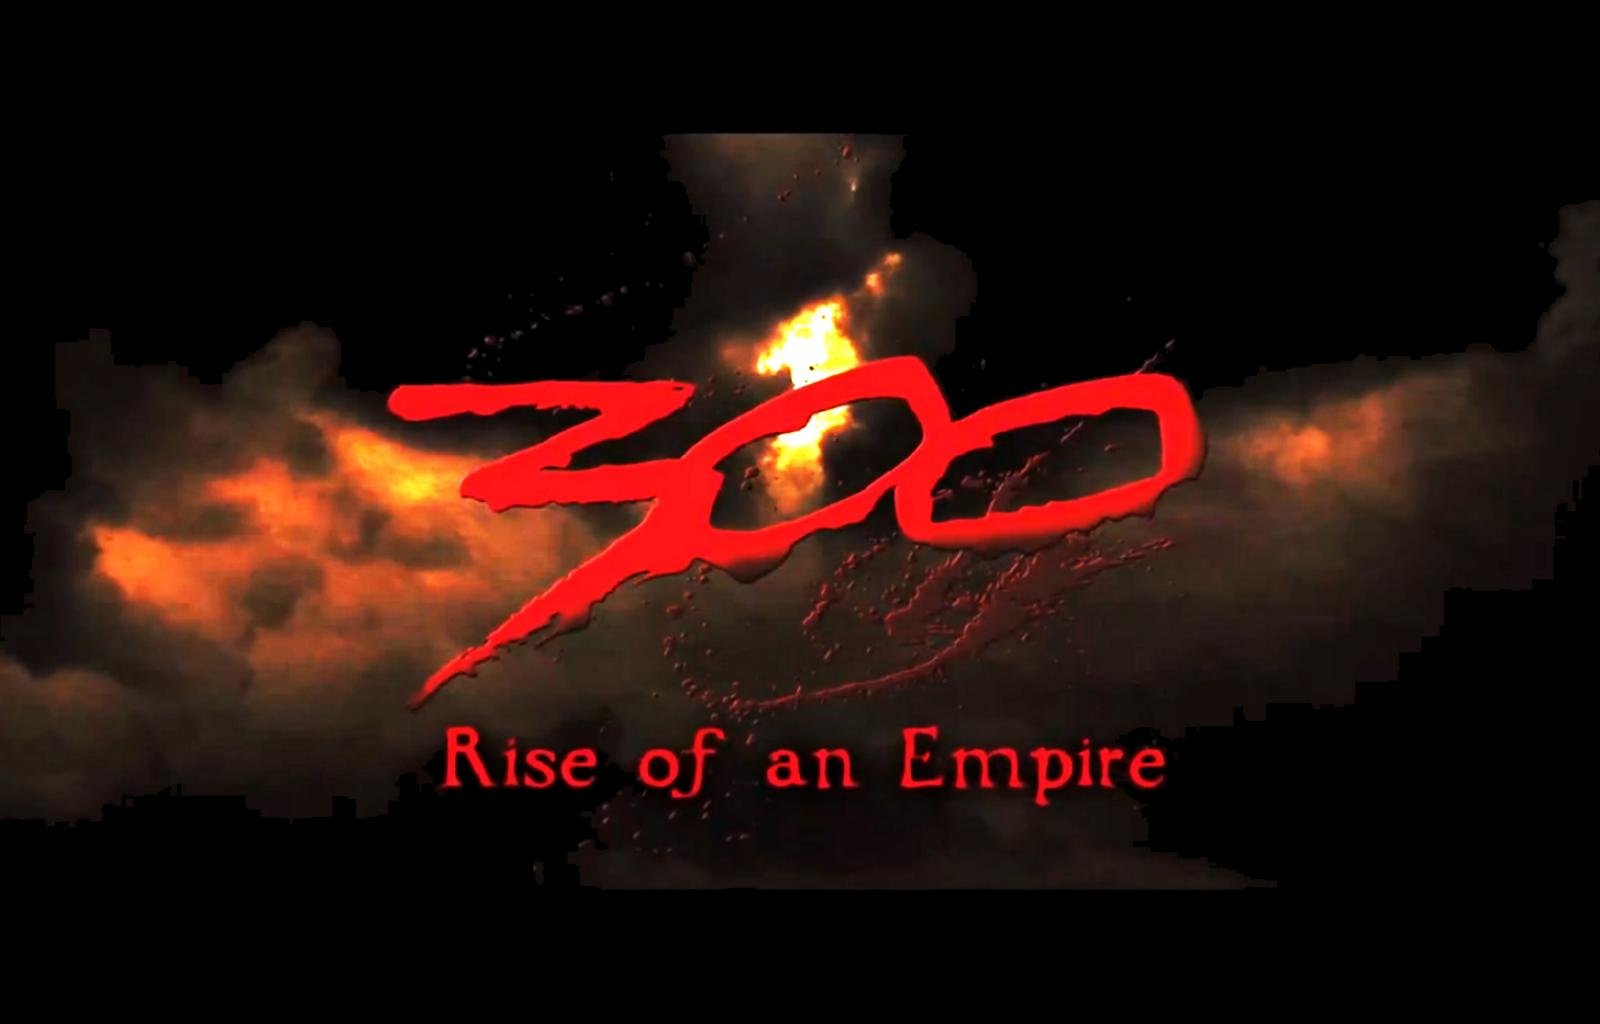 300 rise of an empire movie full online free